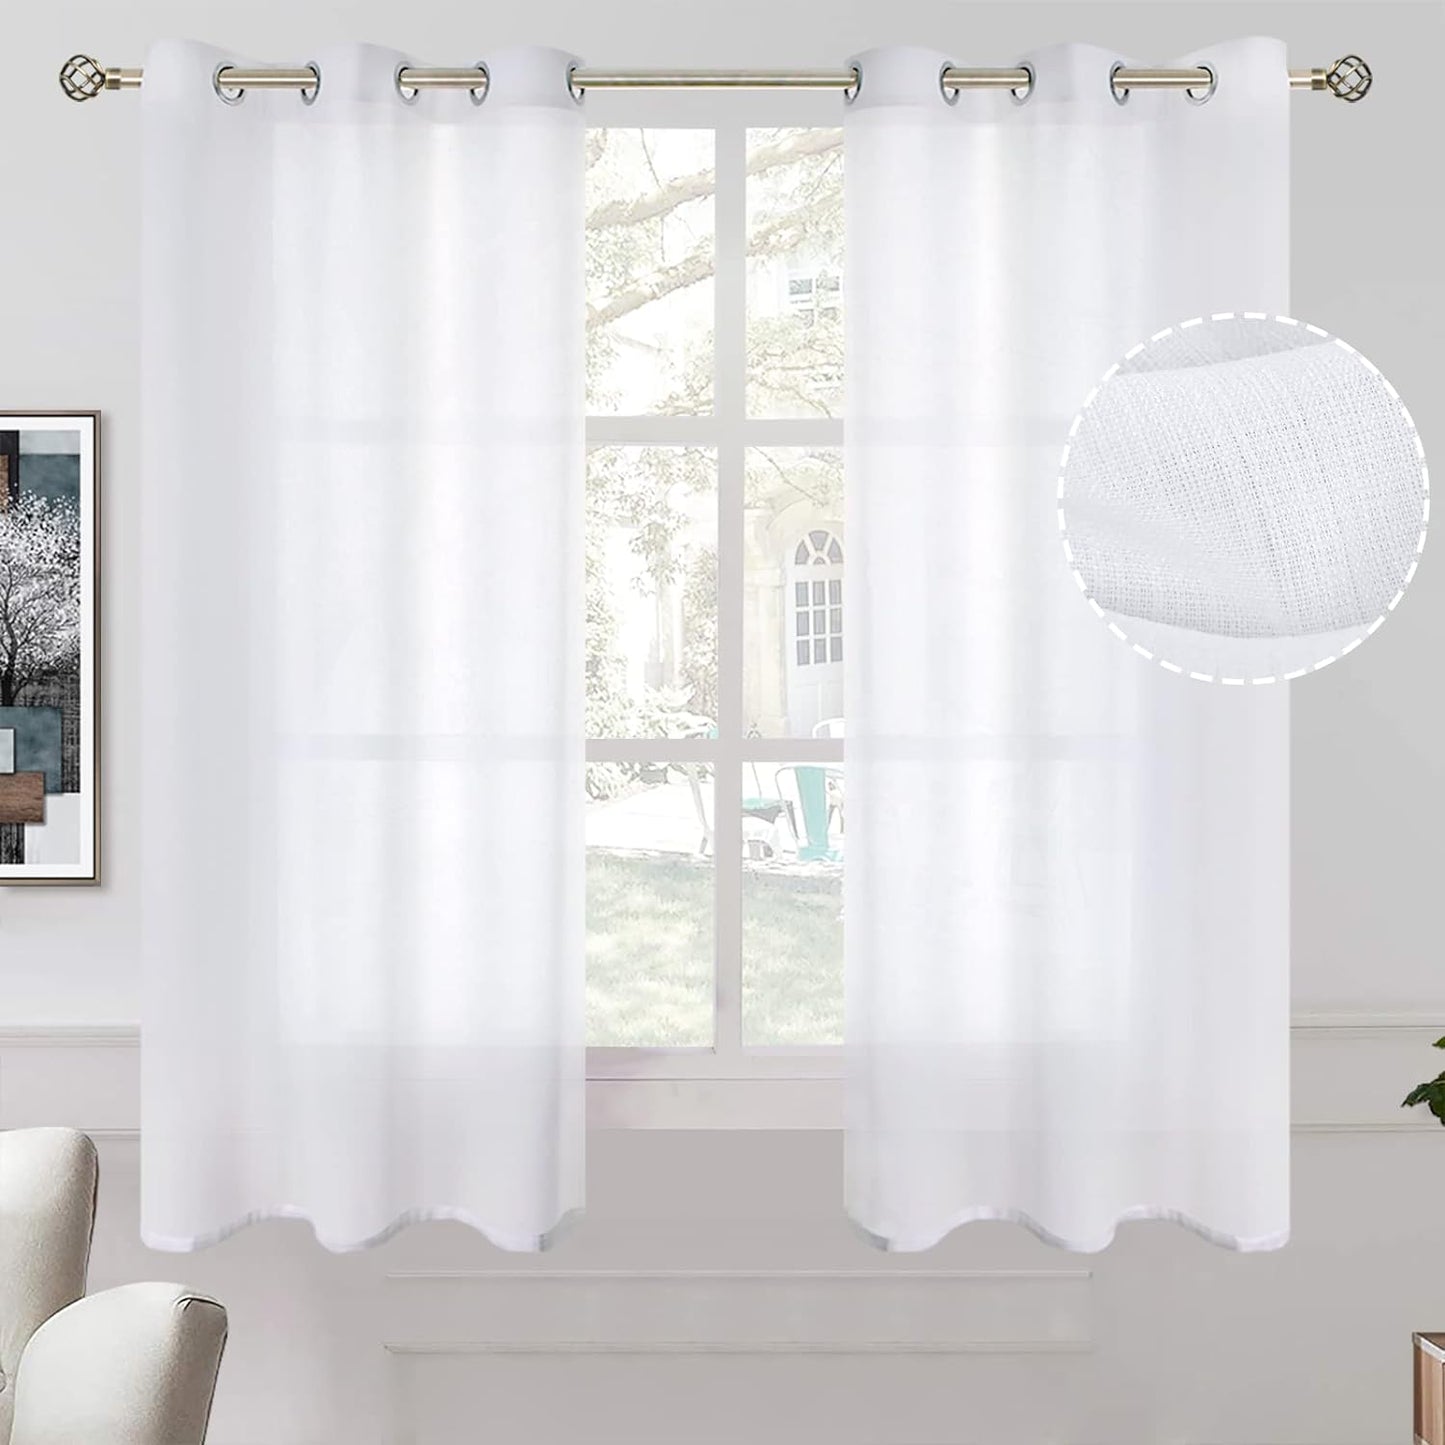 Bgment Natural Linen Look Semi Sheer Curtains for Bedroom, 52 X 54 Inch White Grommet Light Filtering Casual Textured Privacy Curtains for Bay Window, 2 Panels  BGment White 42W X 45L 